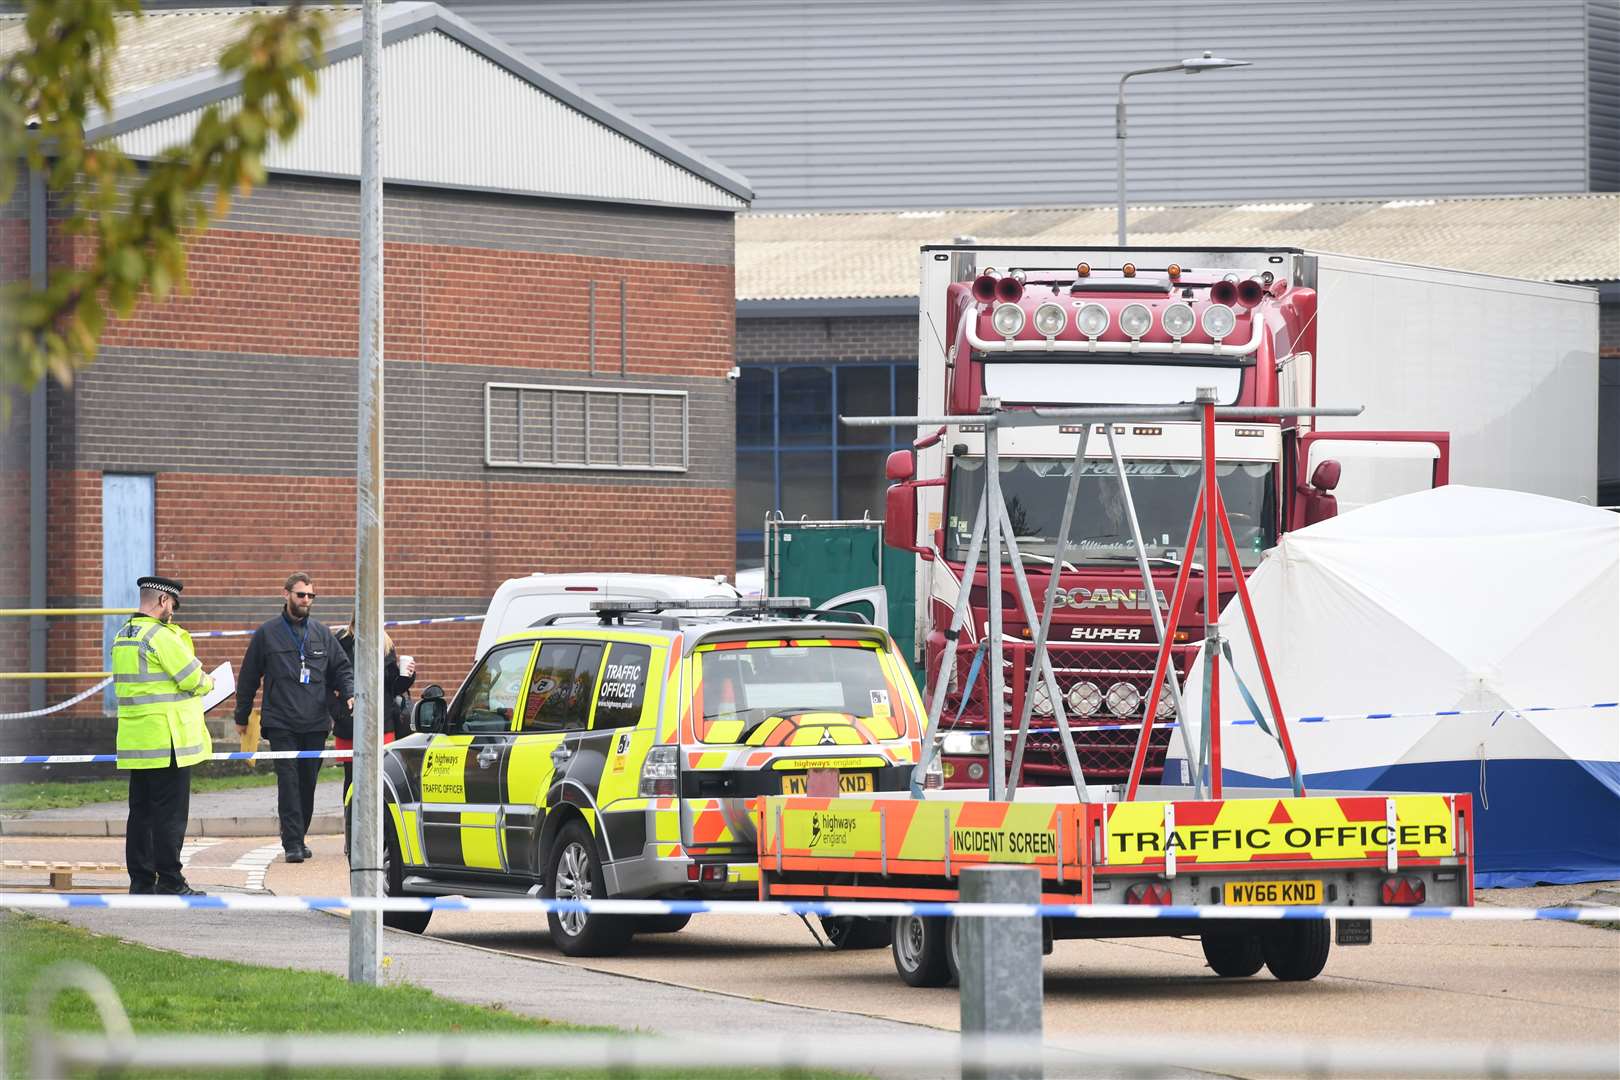 Police activity at the Waterglade Industrial Park in Grays, Essex, after 39 bodies were found inside a lorry container on the industrial estate. Pic: Stefan Rousseau/PA Wire